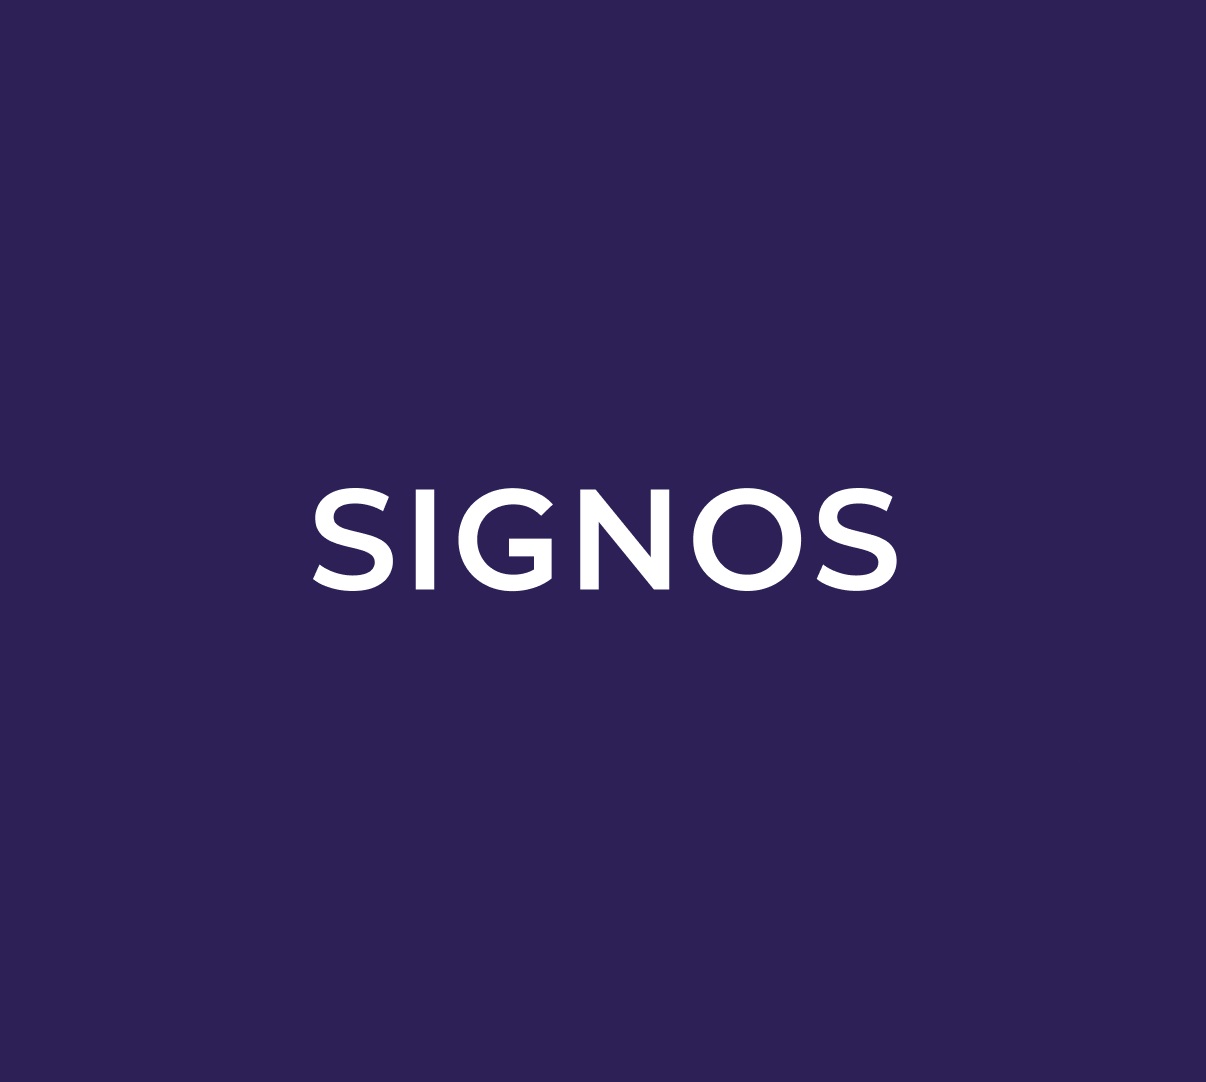 New AI-Powered Weight Loss Platform Signos Raises $20 Million In Funding